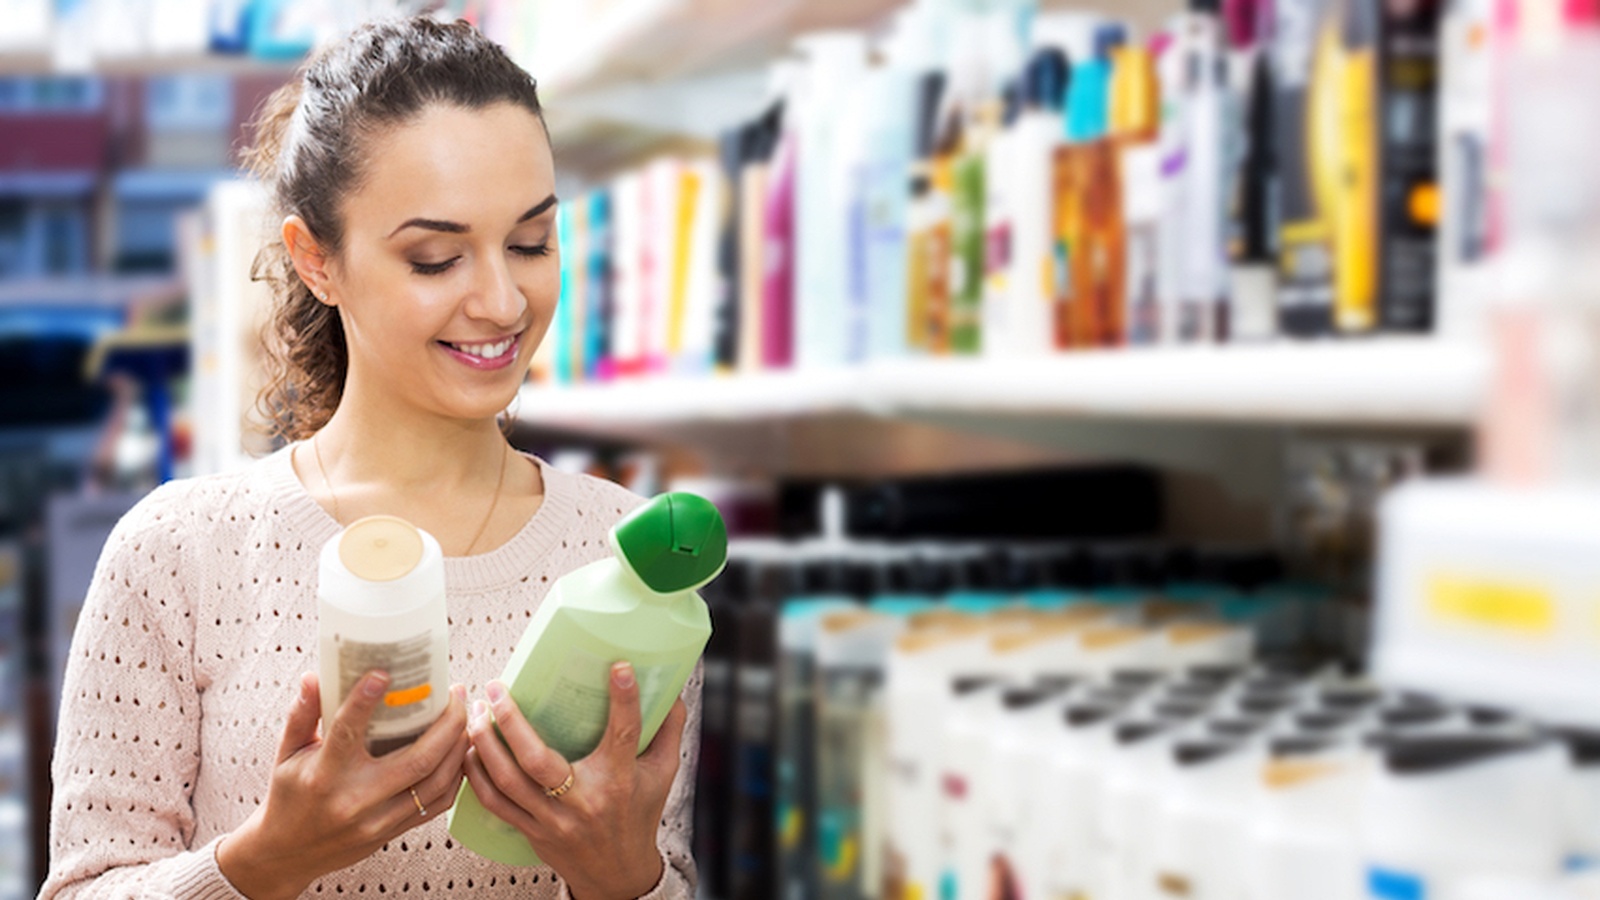 Warning: Is Your Shampoo Harming Your Health?